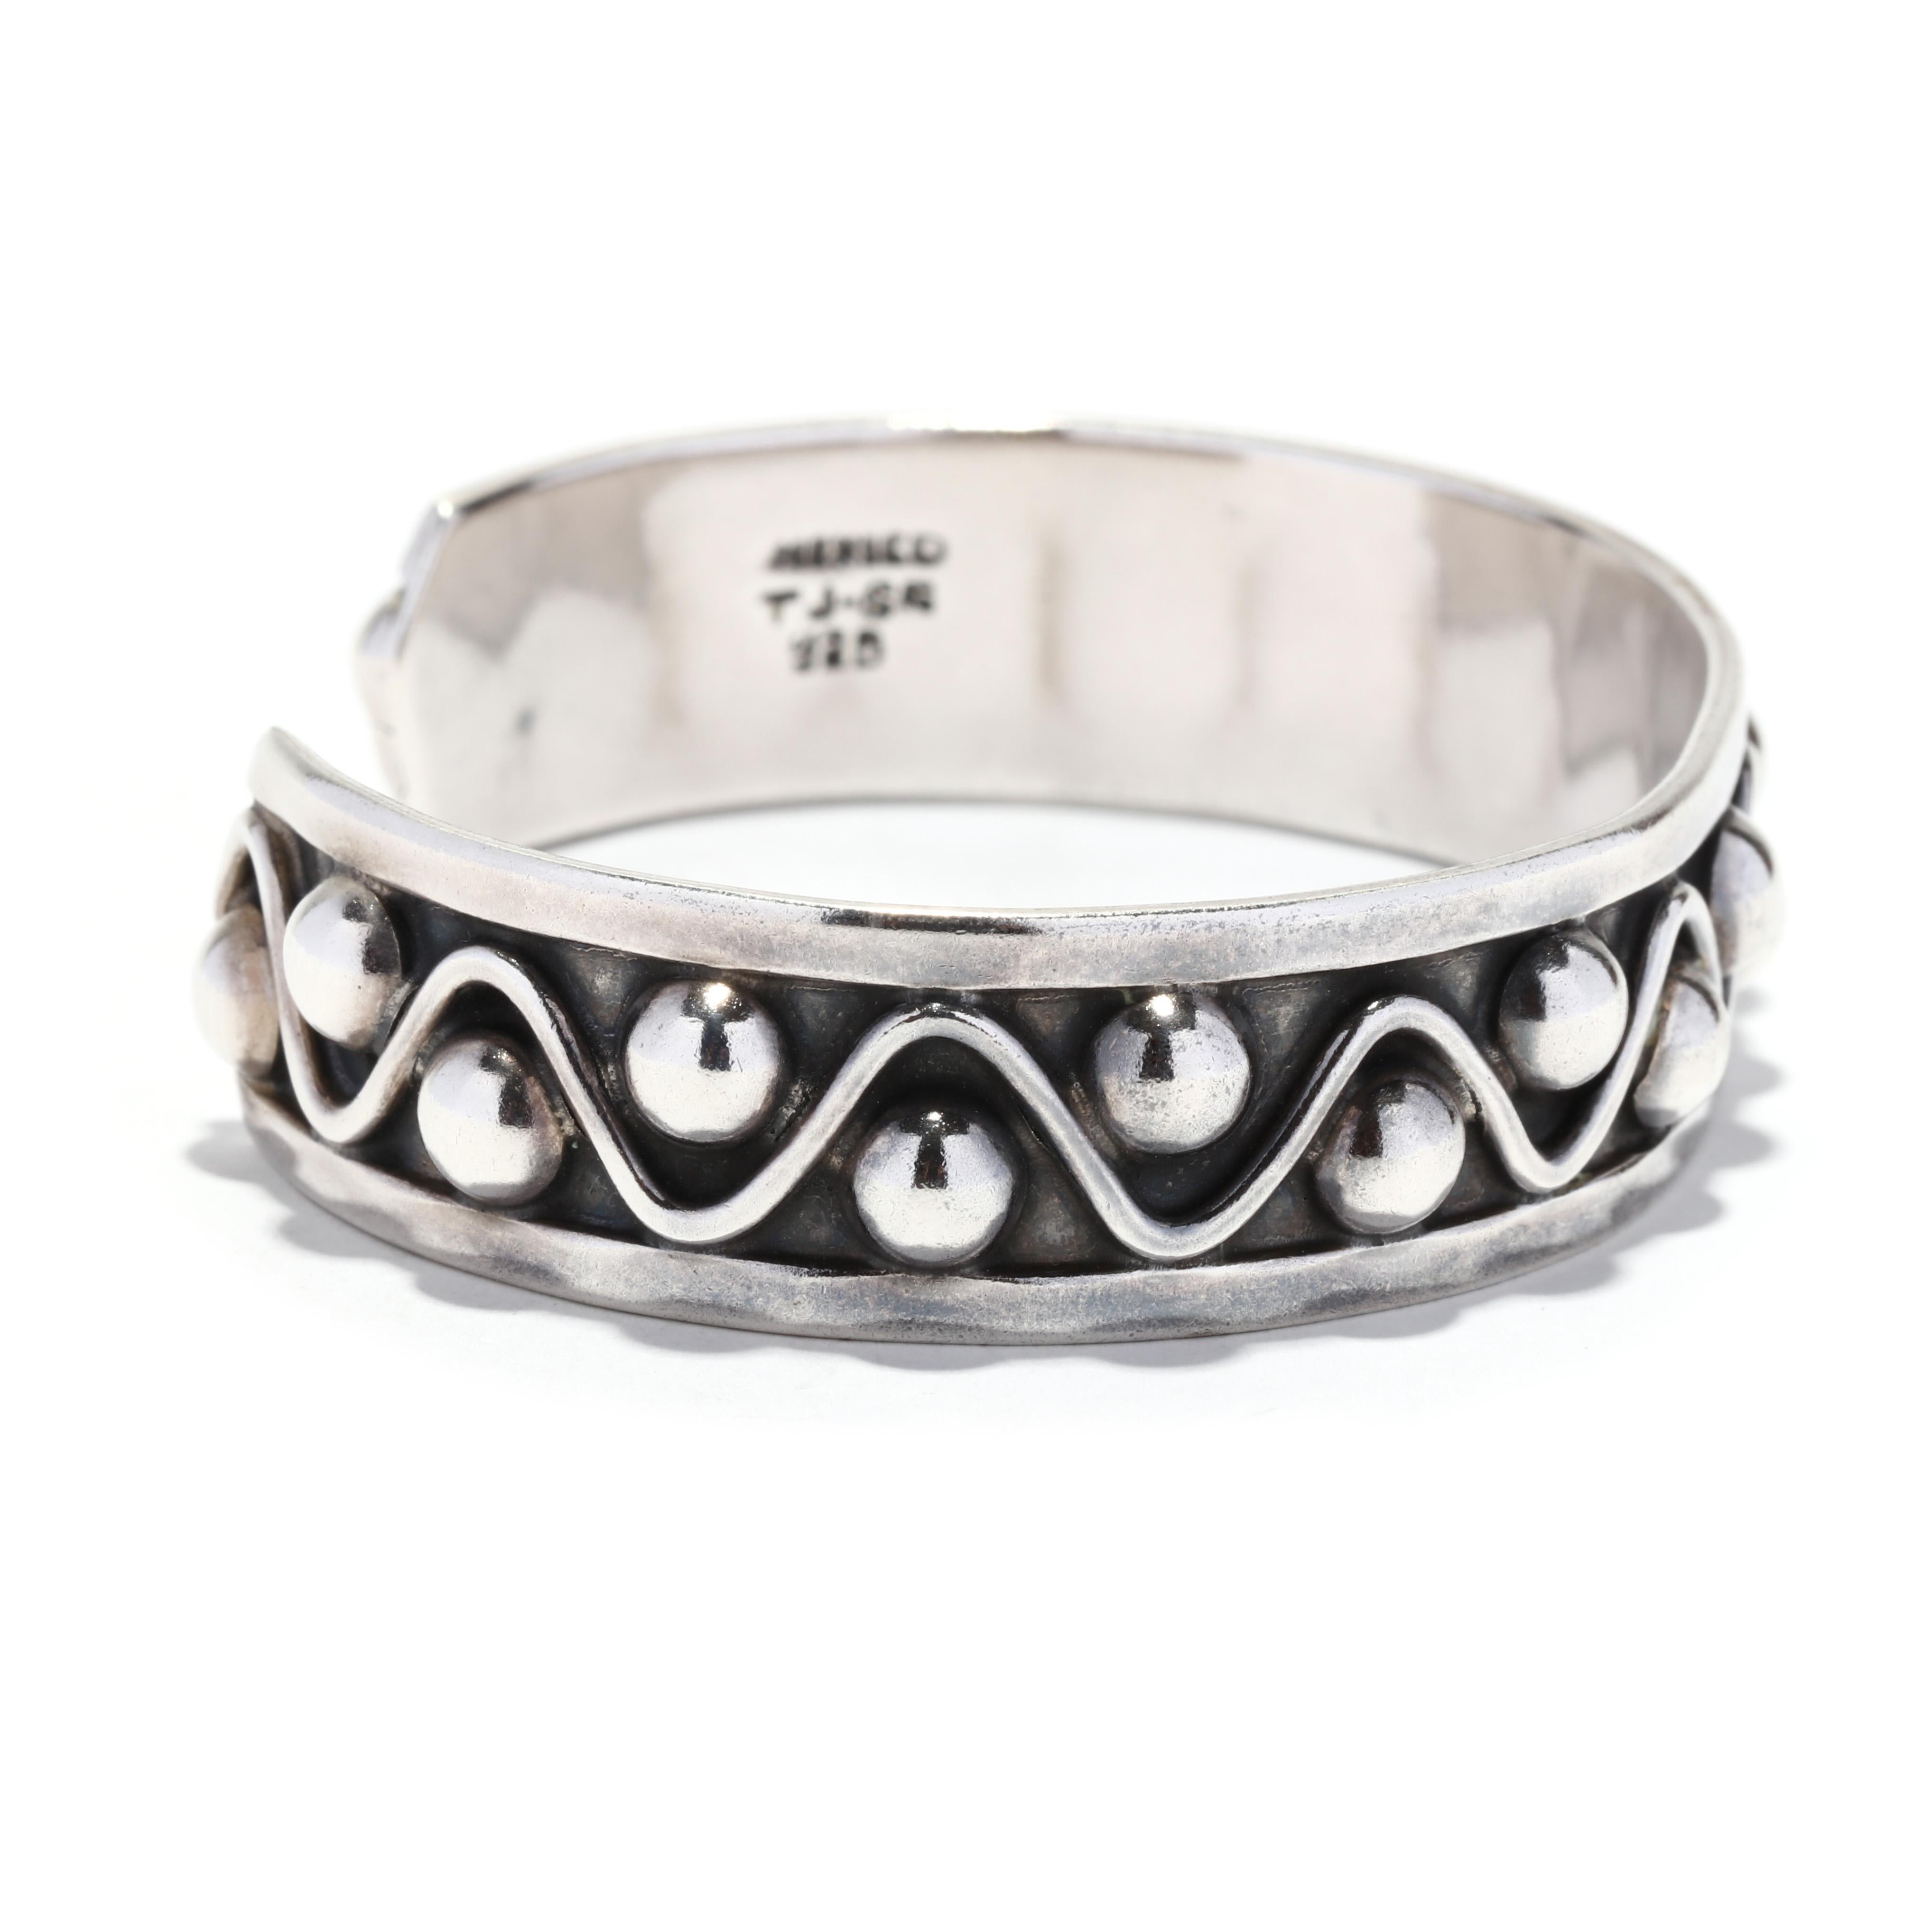 This stunning sterling silver Mexican cuff bracelet is a unique piece that will make a beautiful addition to any jewelry collection. Measuring 6 1/2 inches in length, this studded cuff bracelet is perfect for adding a touch of style and